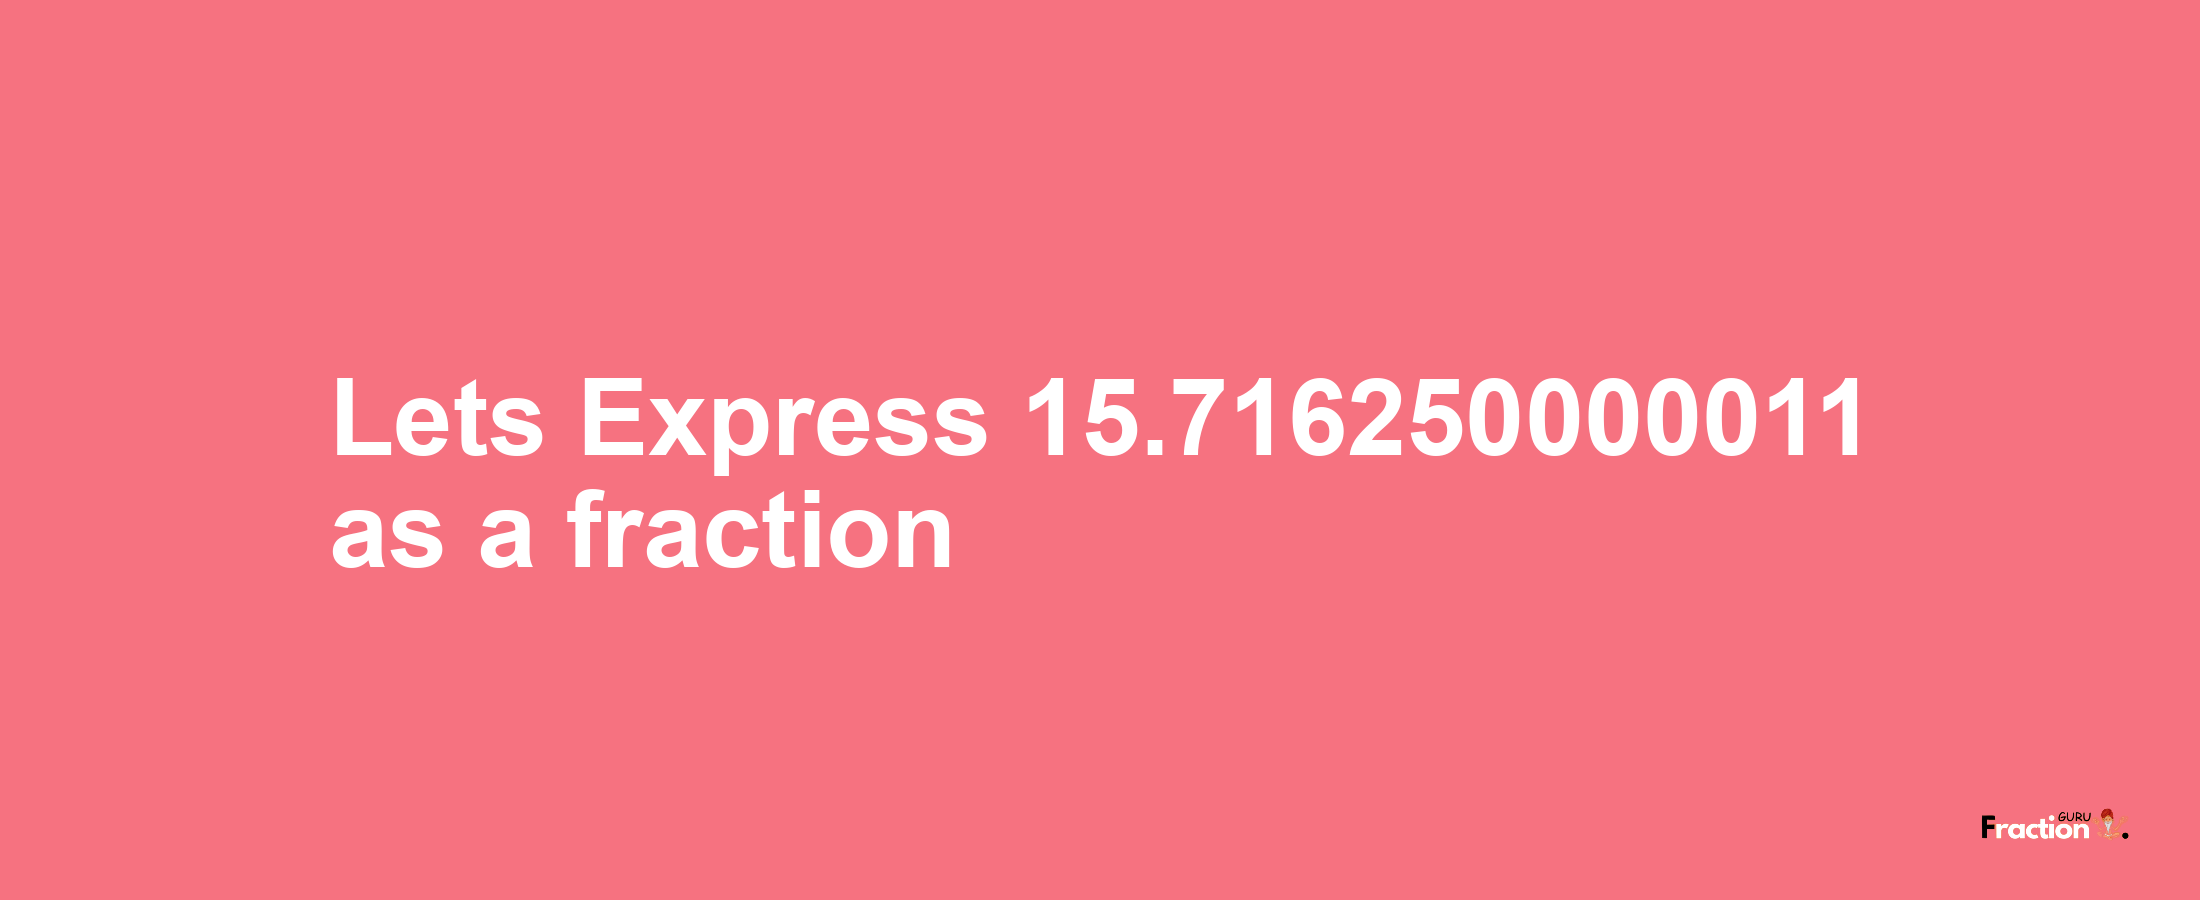 Lets Express 15.716250000011 as afraction